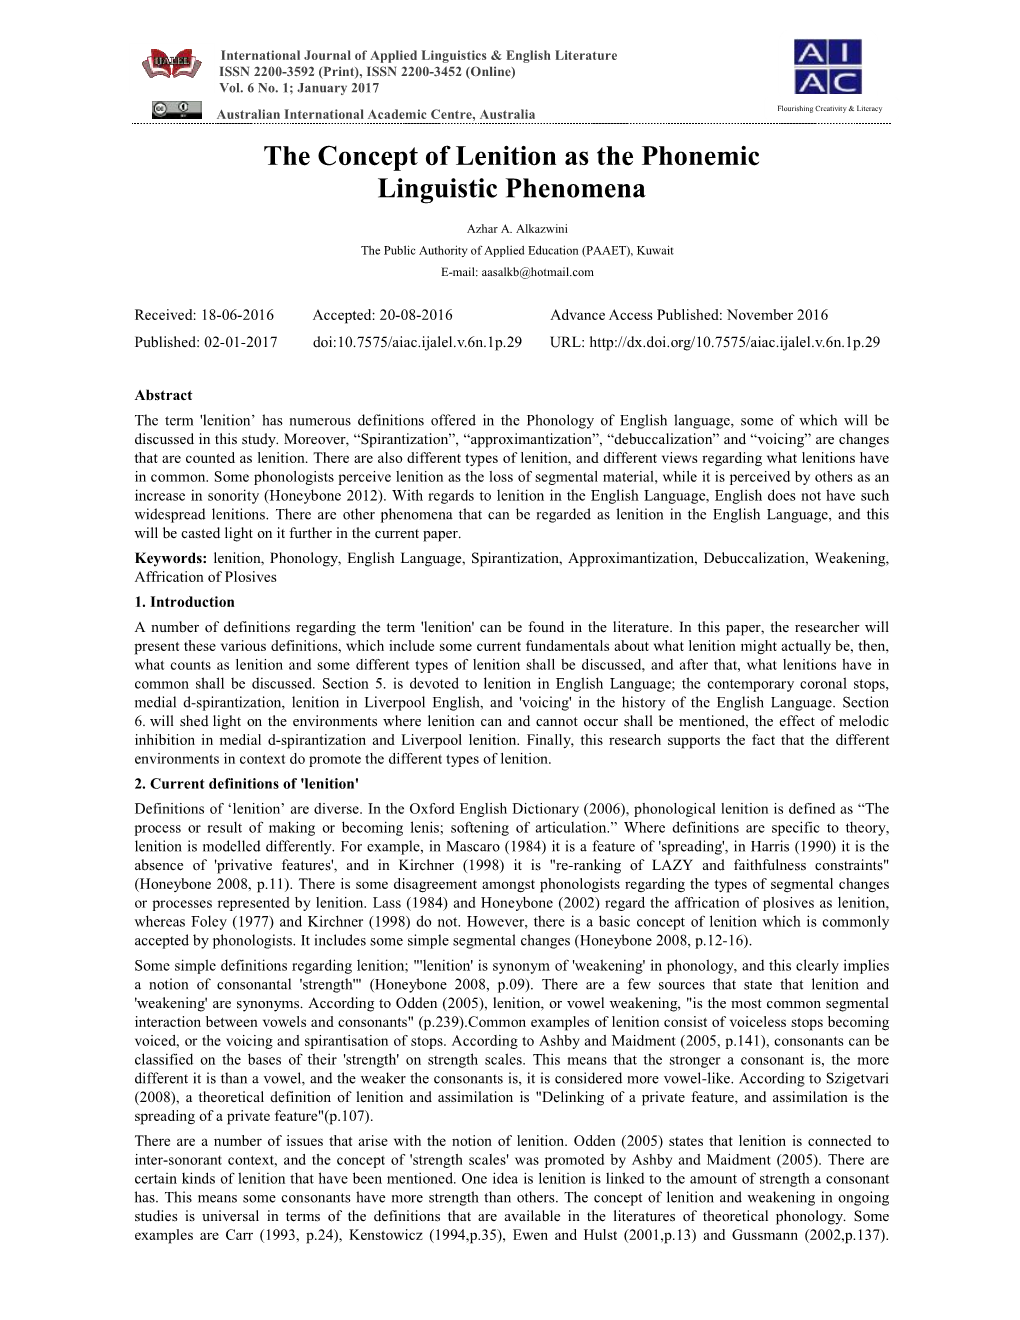 The Concept of Lenition As the Phonemic Linguistic Phenomena